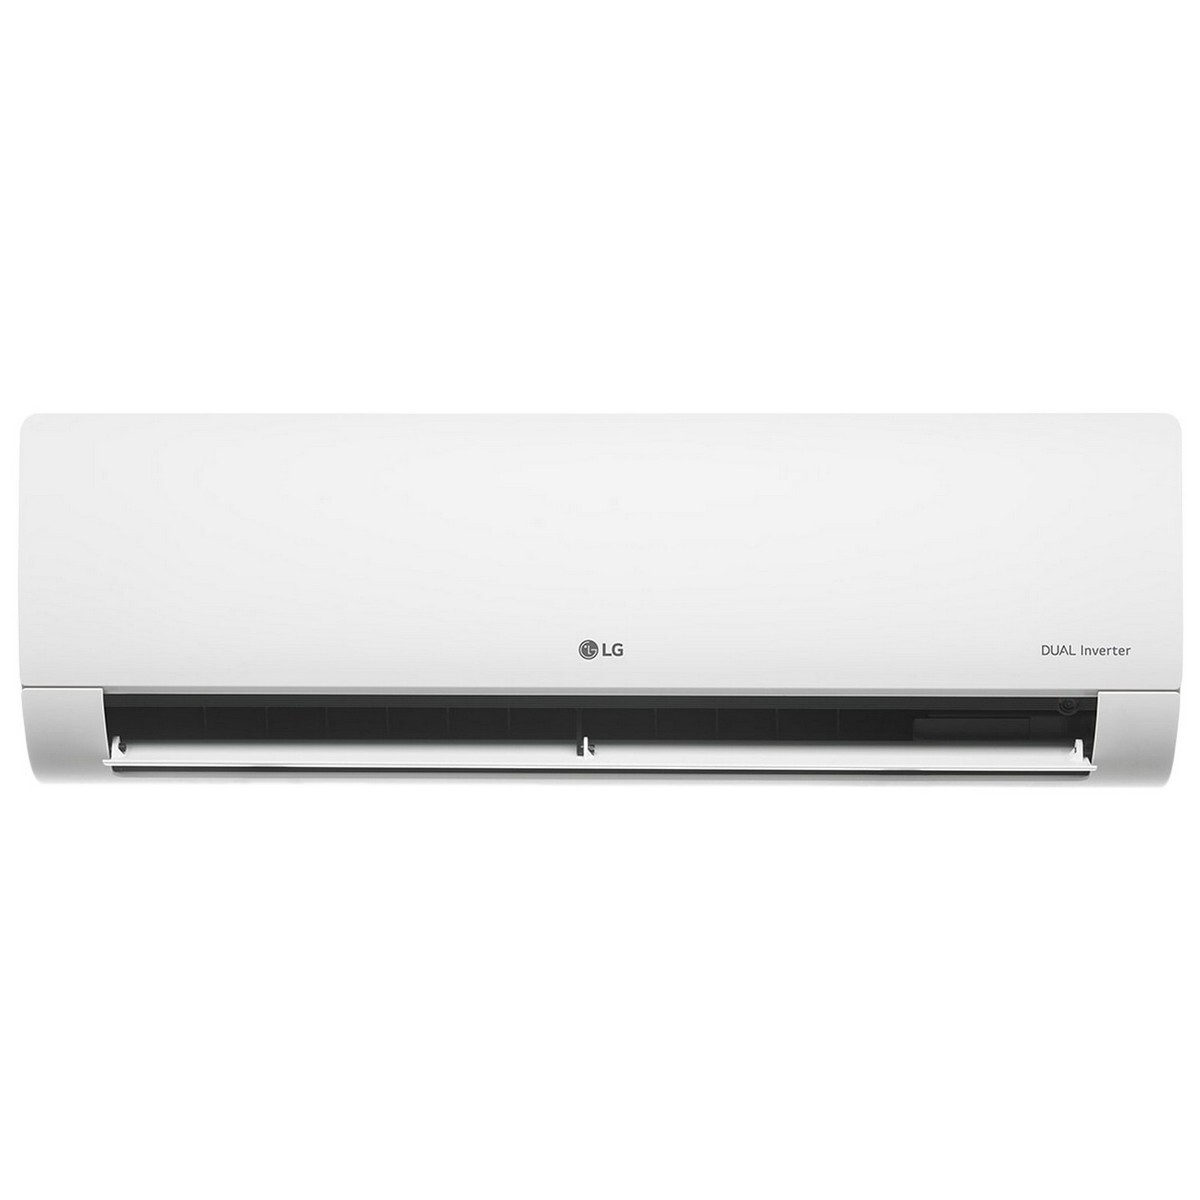 LG 6 in 1 Convertible Air Conditioner Inverter RS-Q18CNXE 1.5 Ton 3 Star